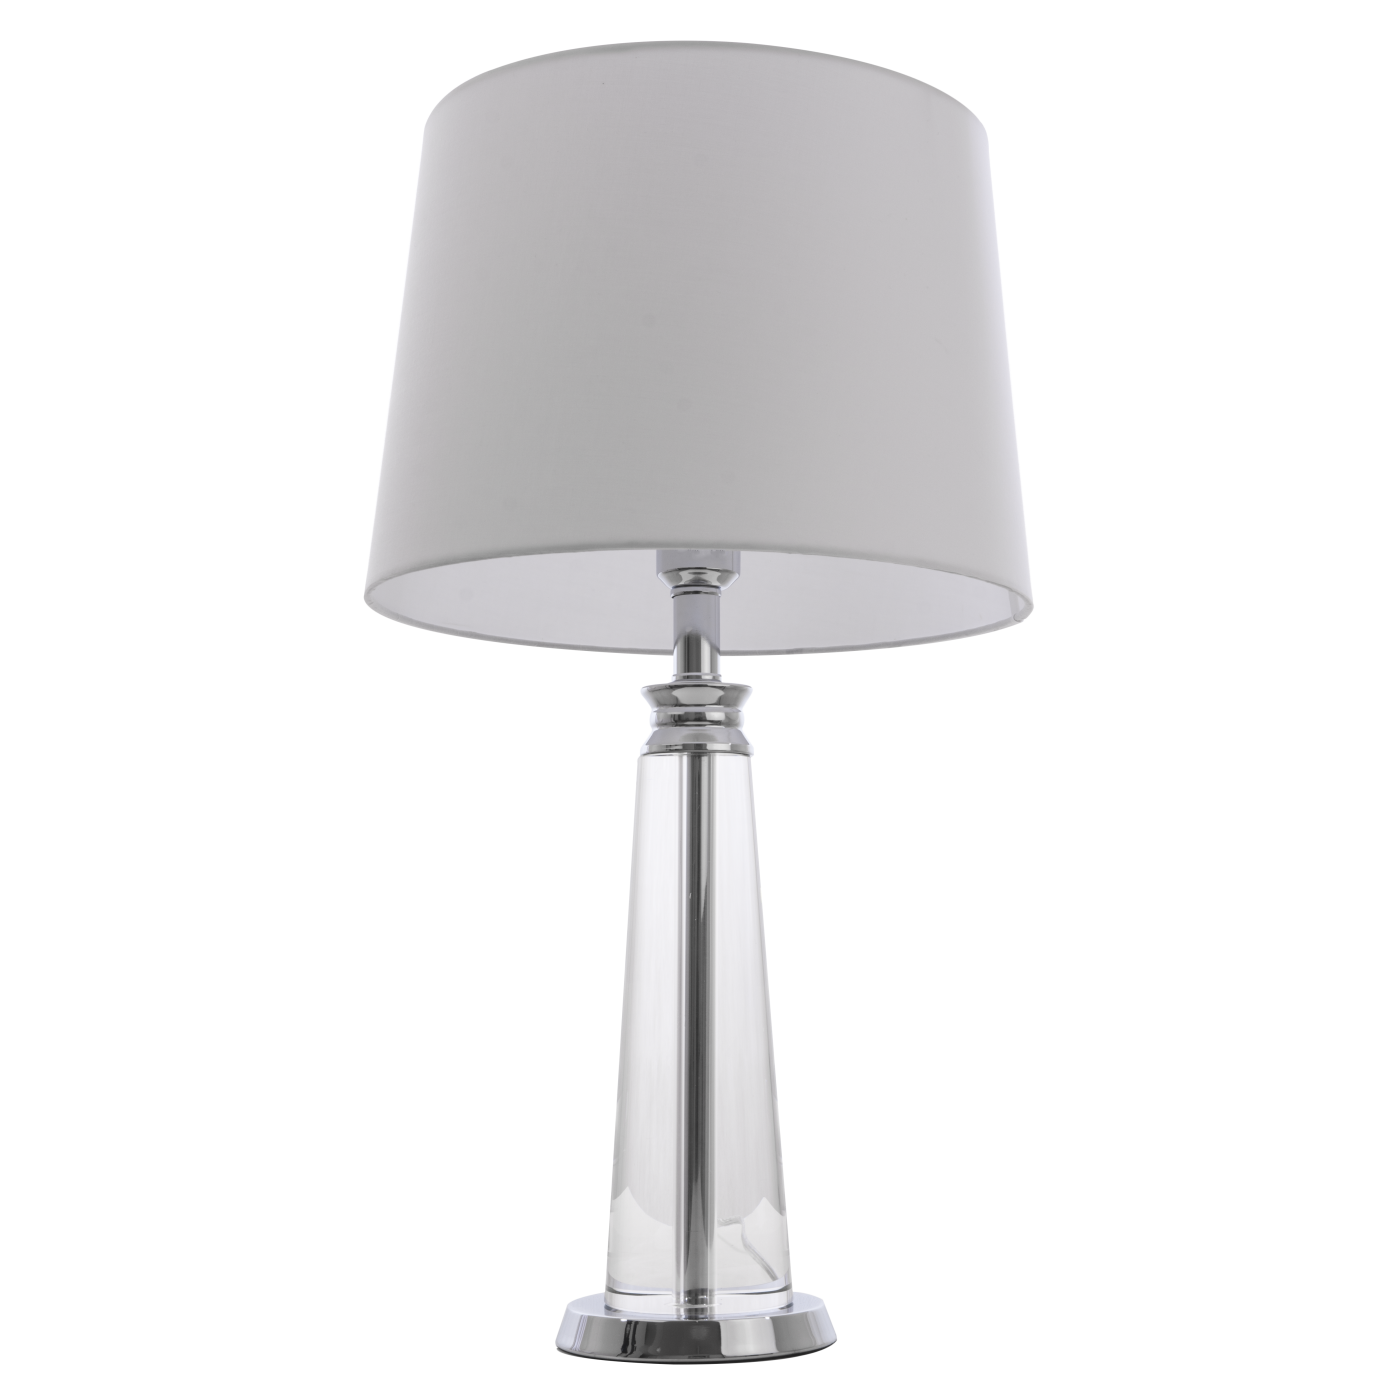 Charlotte T01332wh Cosmo Light, Cosmo Table Lamp